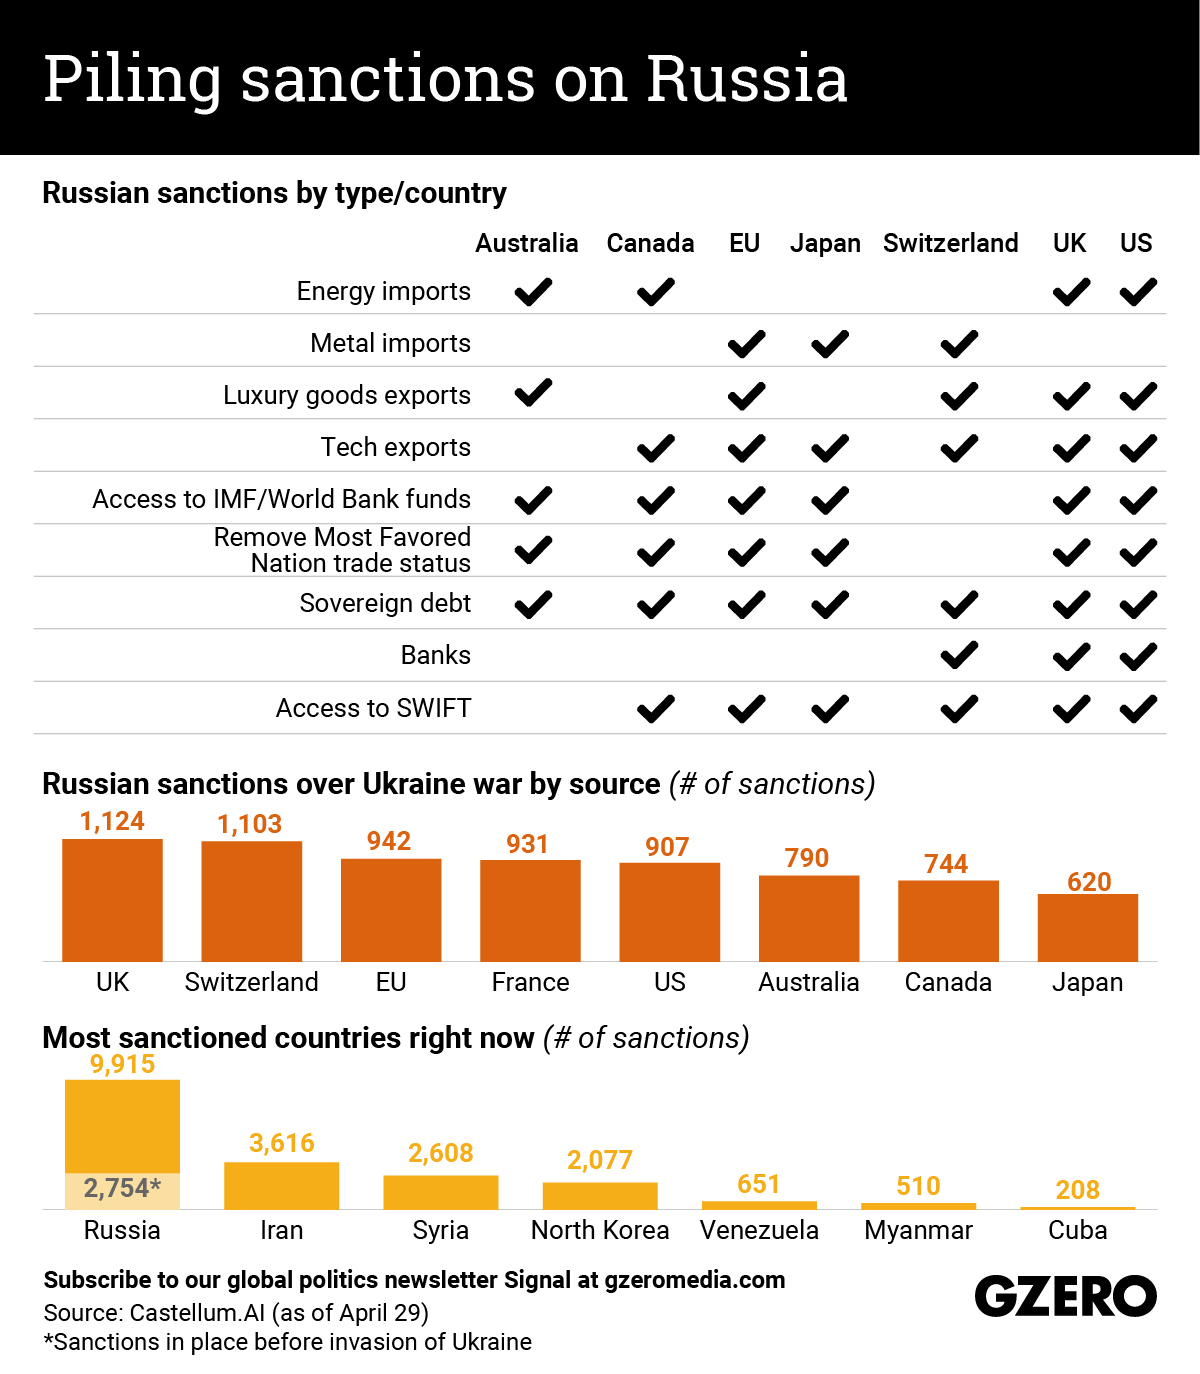 Piling sanctions on Russia | Russian sanctions by type and country (infographic)